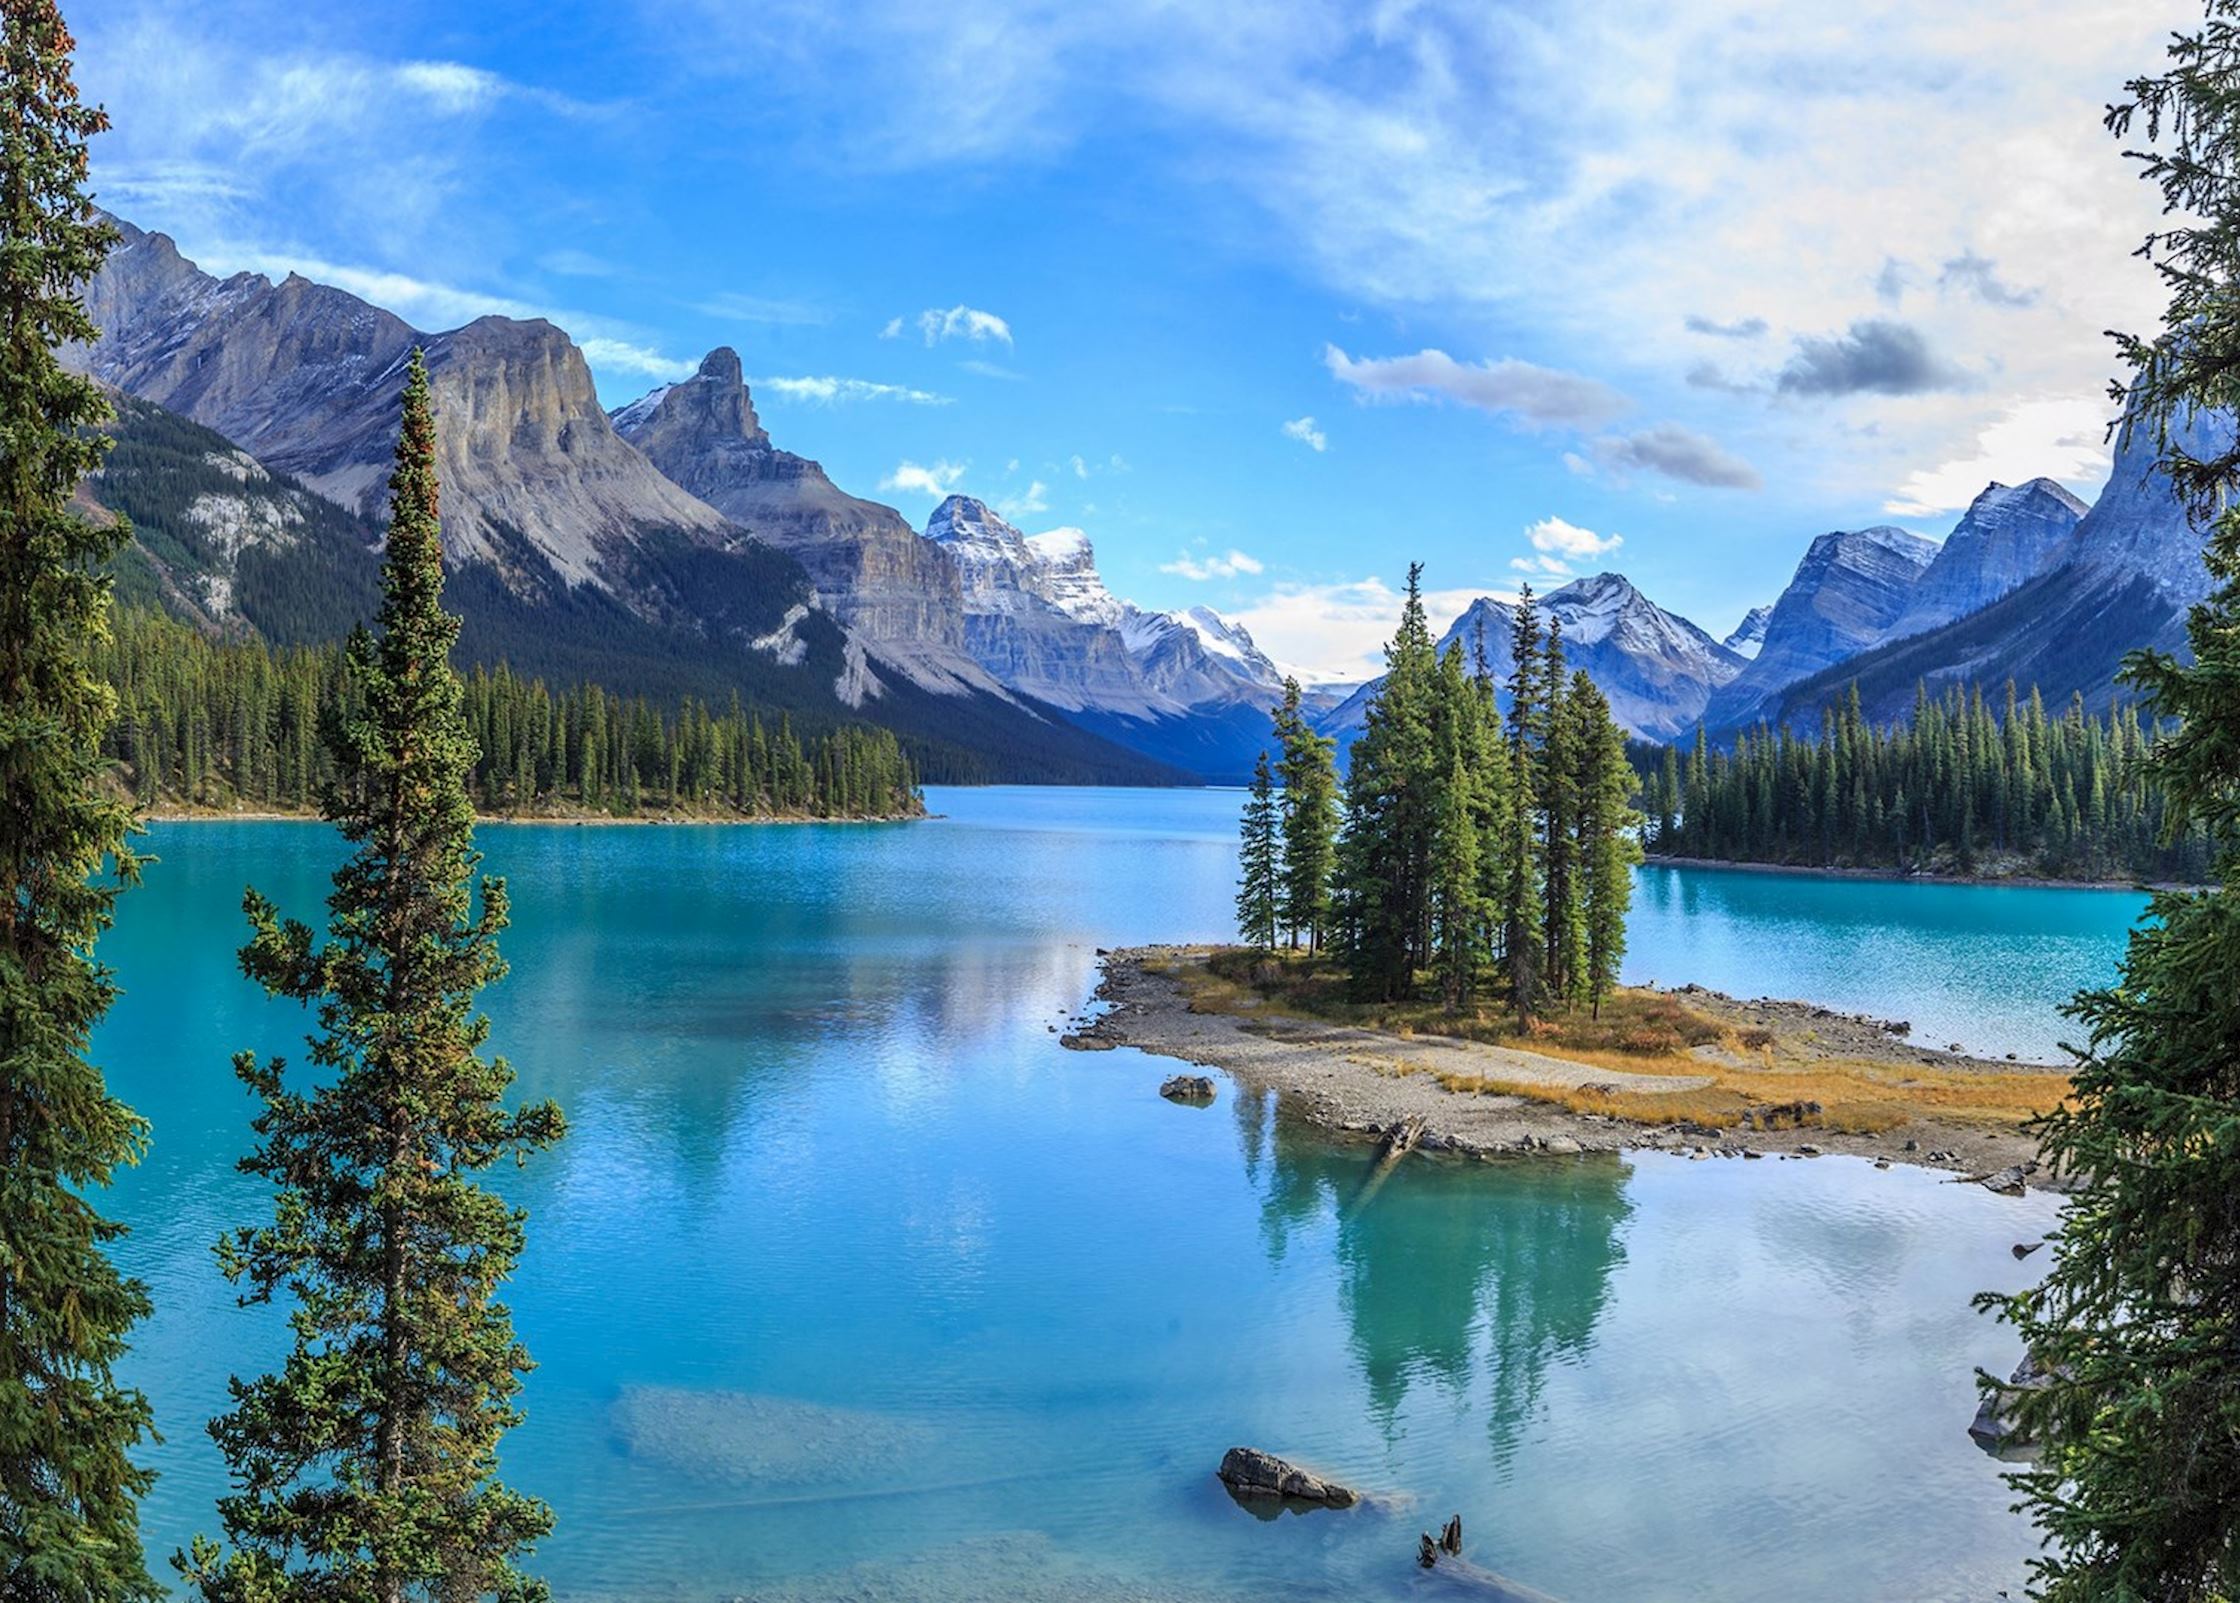 Visit Jasper On A Trip To Canada | Audley Travel